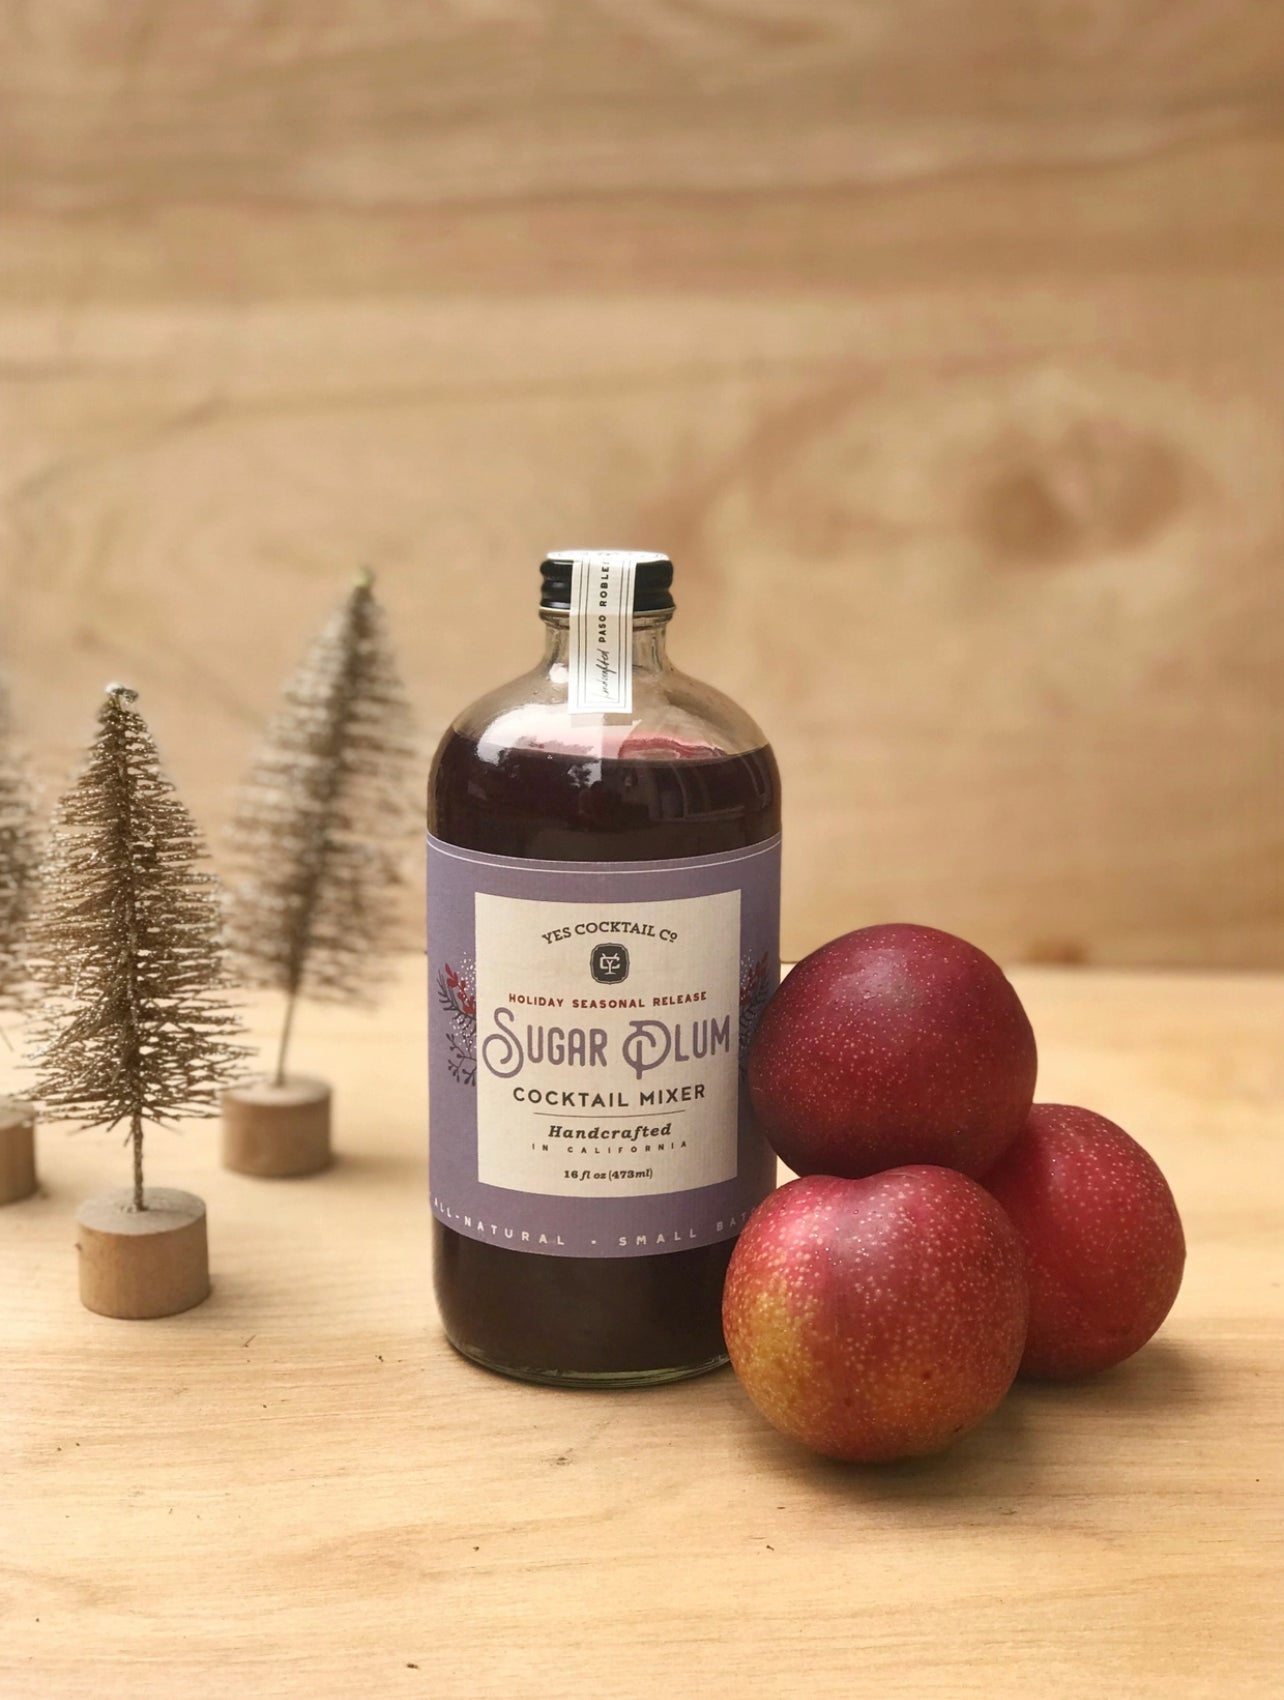 16 oz bottle of hand crafted Sugar Plum Cocktail Mixer made by Yes Cocktail Co on a wood table displayed next to a stack of plums